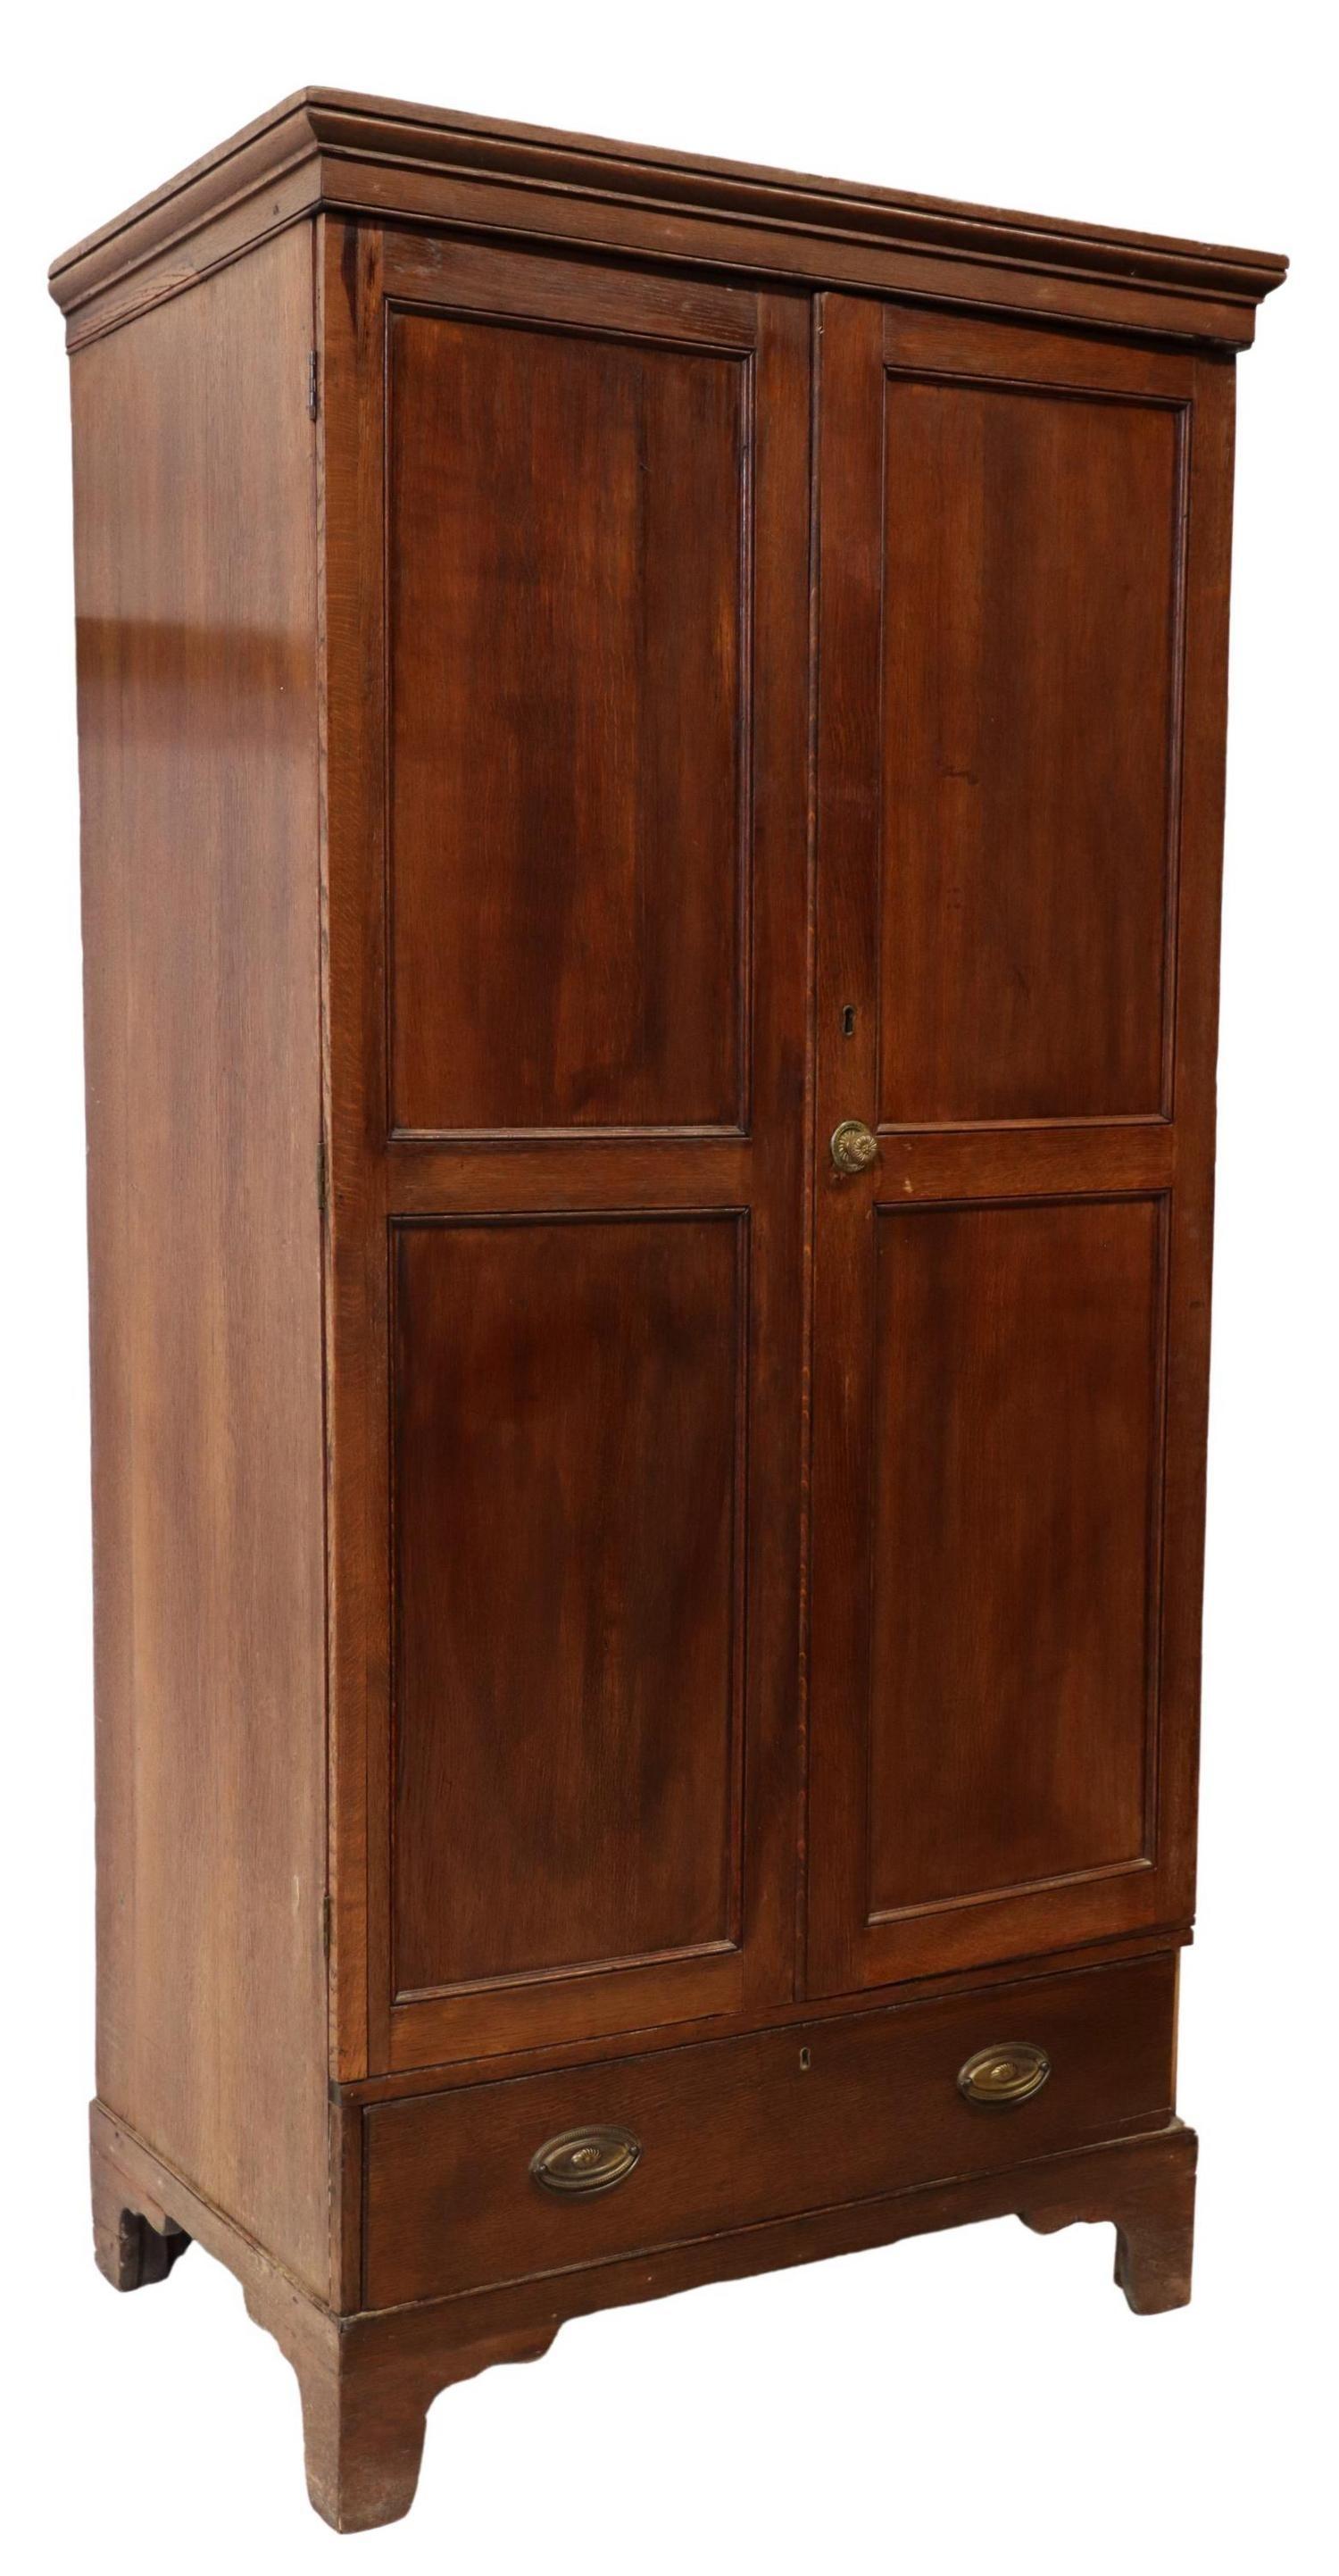 Antique English Georgian oak cupboard, 18th/ 19th c., molded cornice, two paneled doors, lower exterior drawer, on bracket feet, loss to trim at right side of drawer.

Dimensions:
Approx 76.5